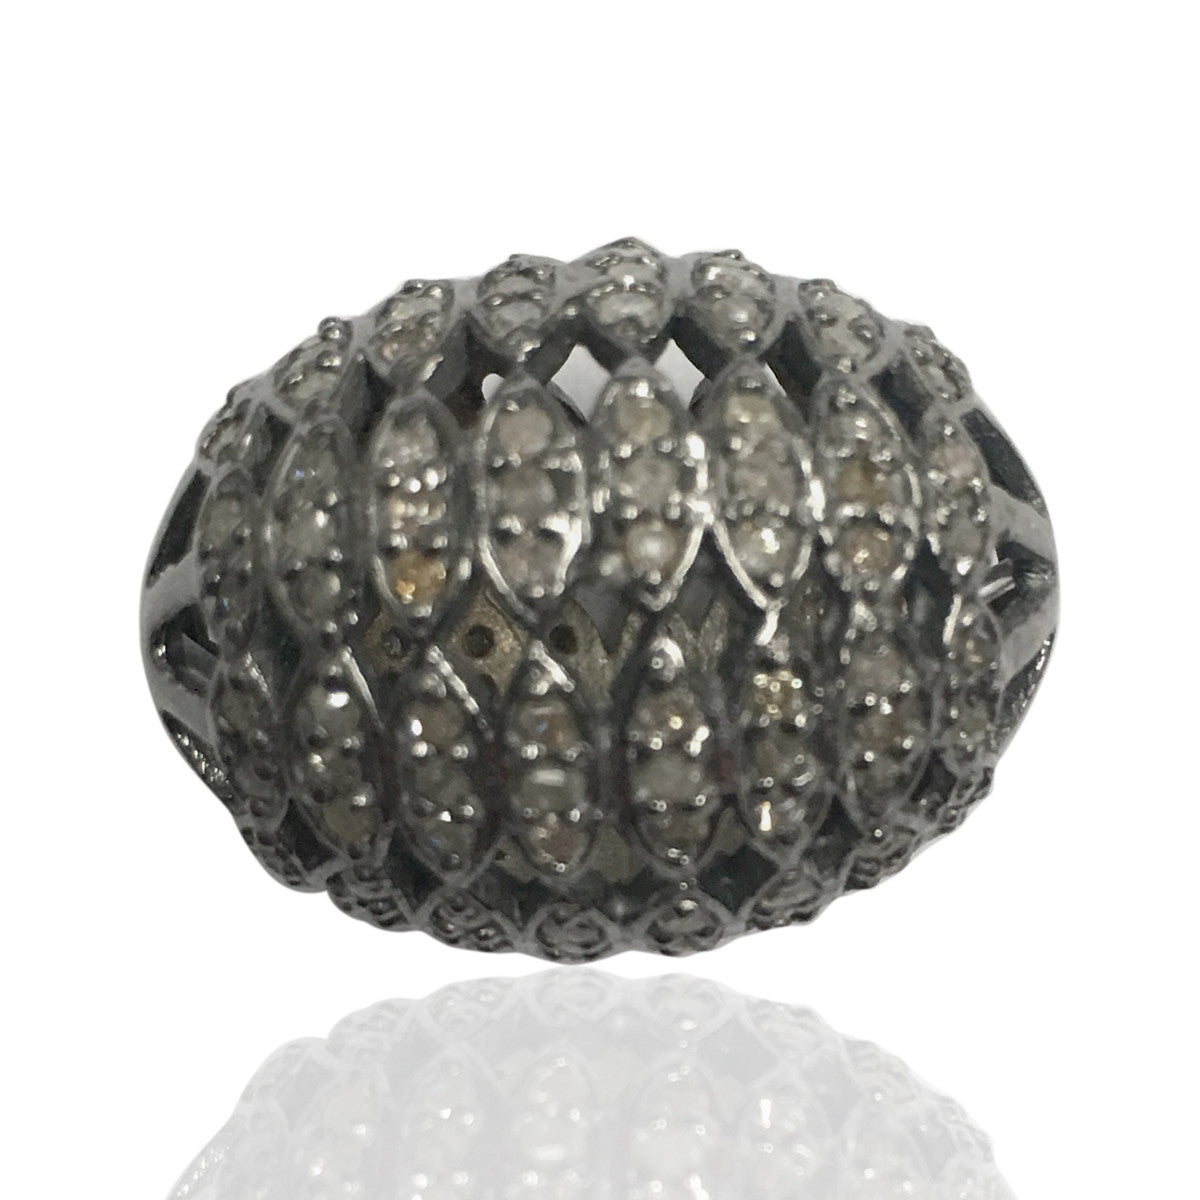 Oval Diamond Bead .925 Oxidized Sterling Silver Diamond Beads, Genuine handmade pave diamond Beads Size Approx 0.80"(16 x 20 MM)